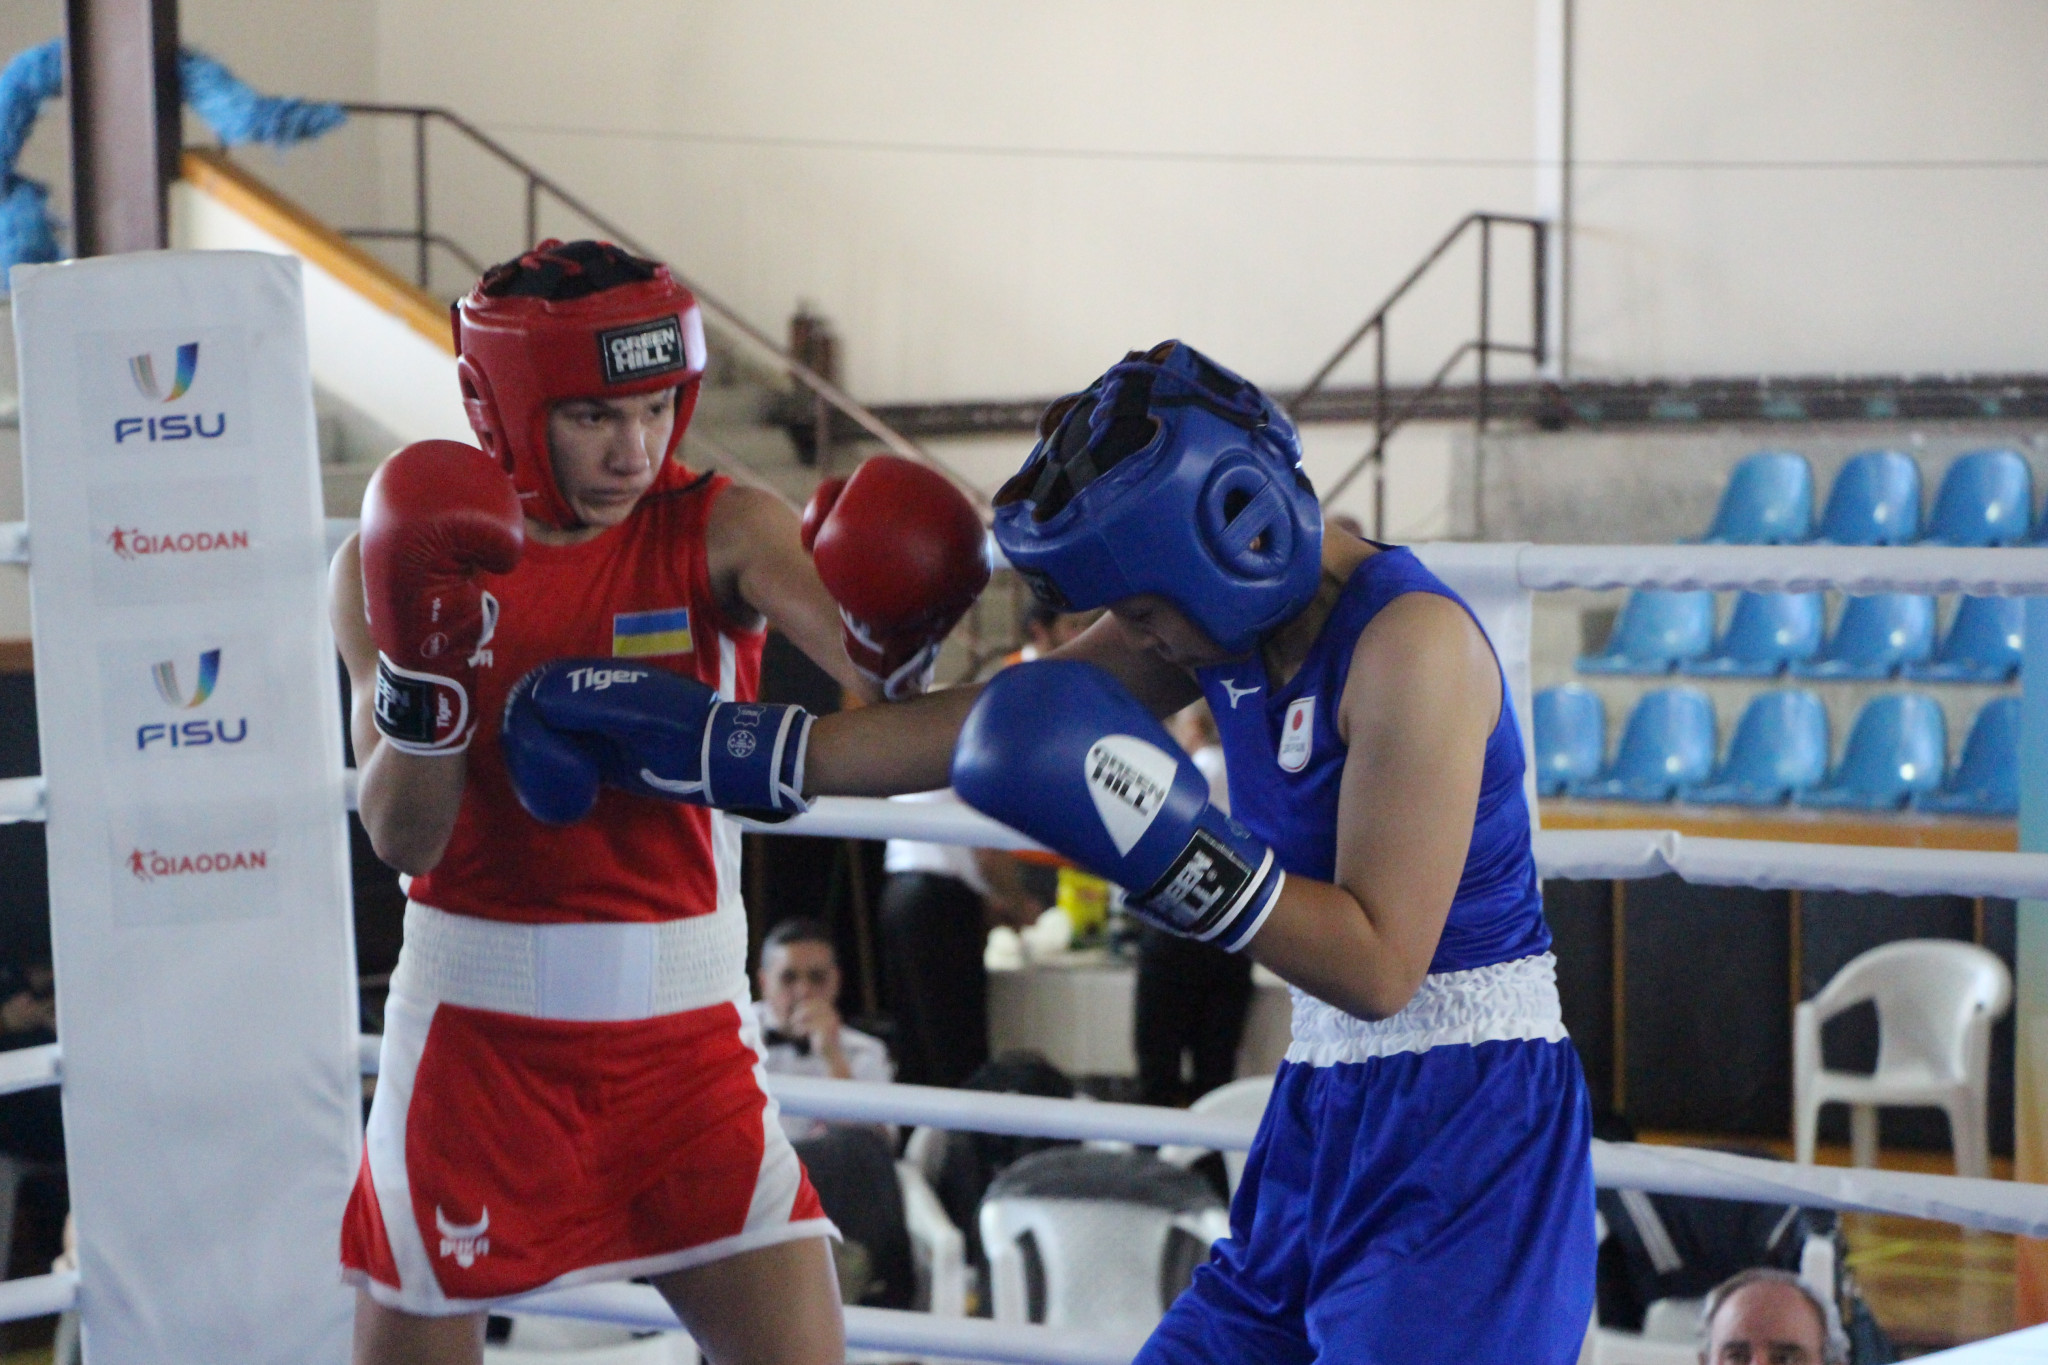 Ukraine have been one of the most prominent teams competing in boxing ©FISU